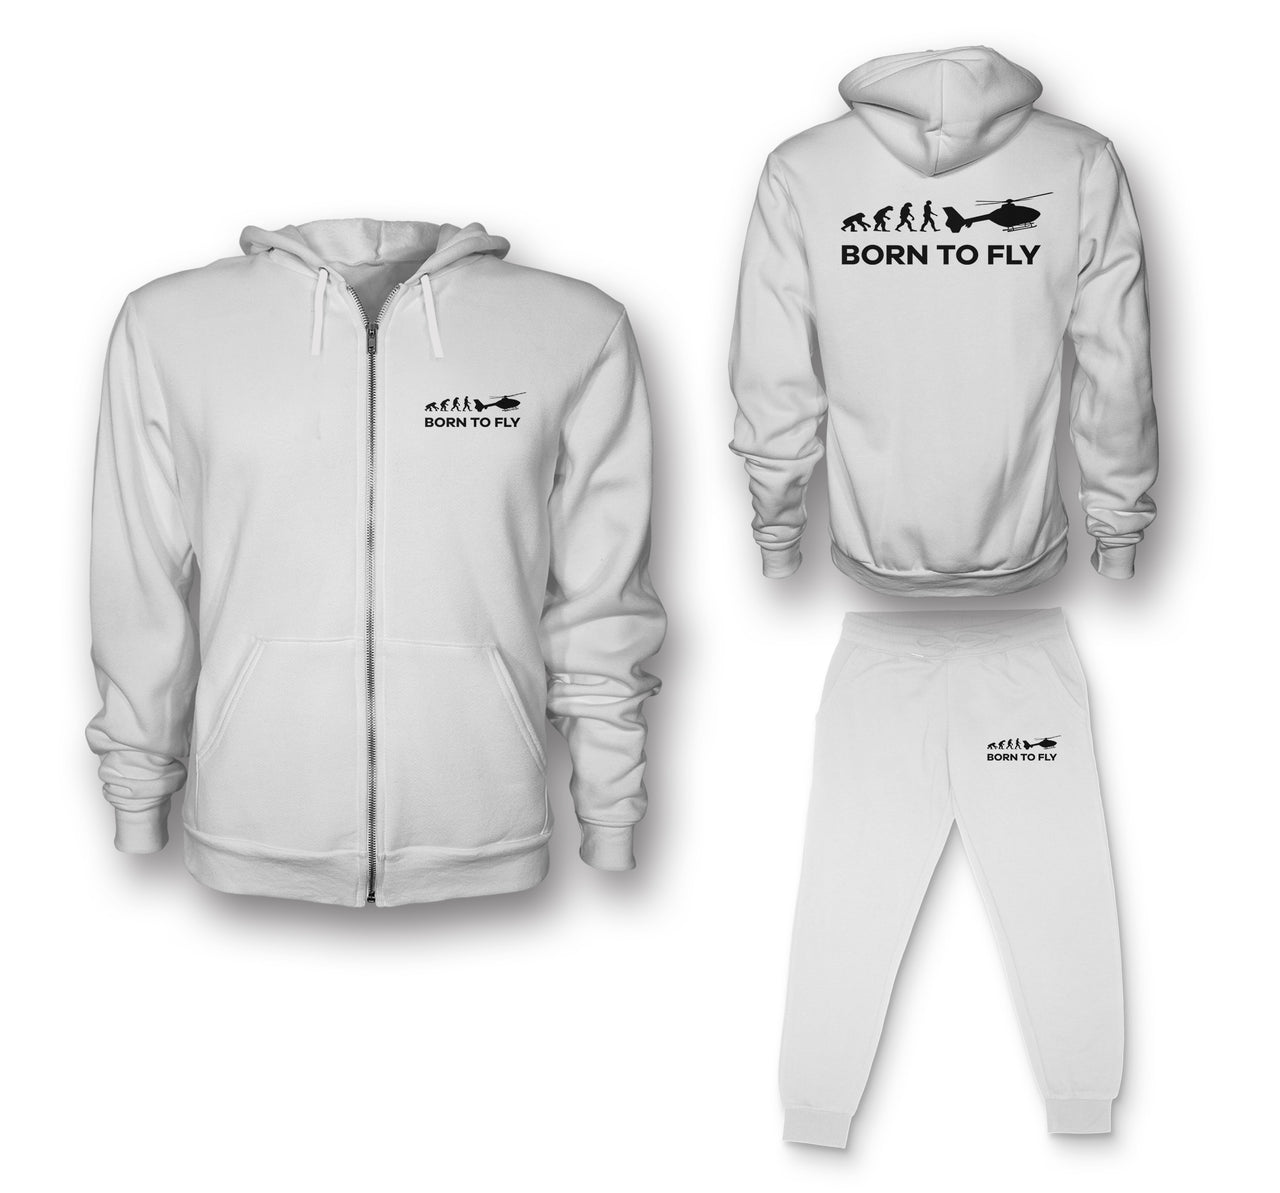 Born To Fly Helicopter Designed Zipped Hoodies & Sweatpants Set